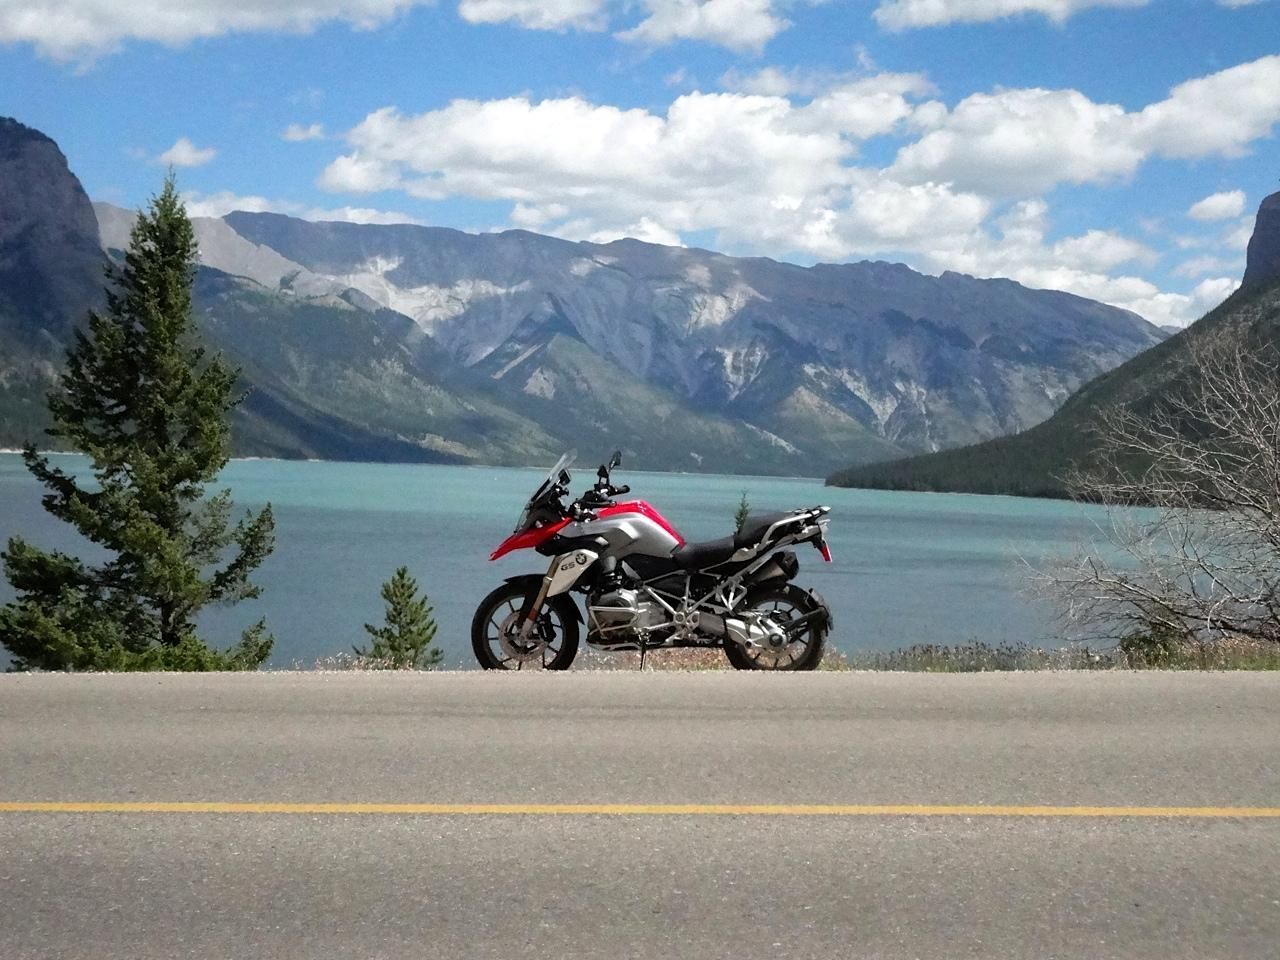 The GS Was Made To Take You To Beautiful Places